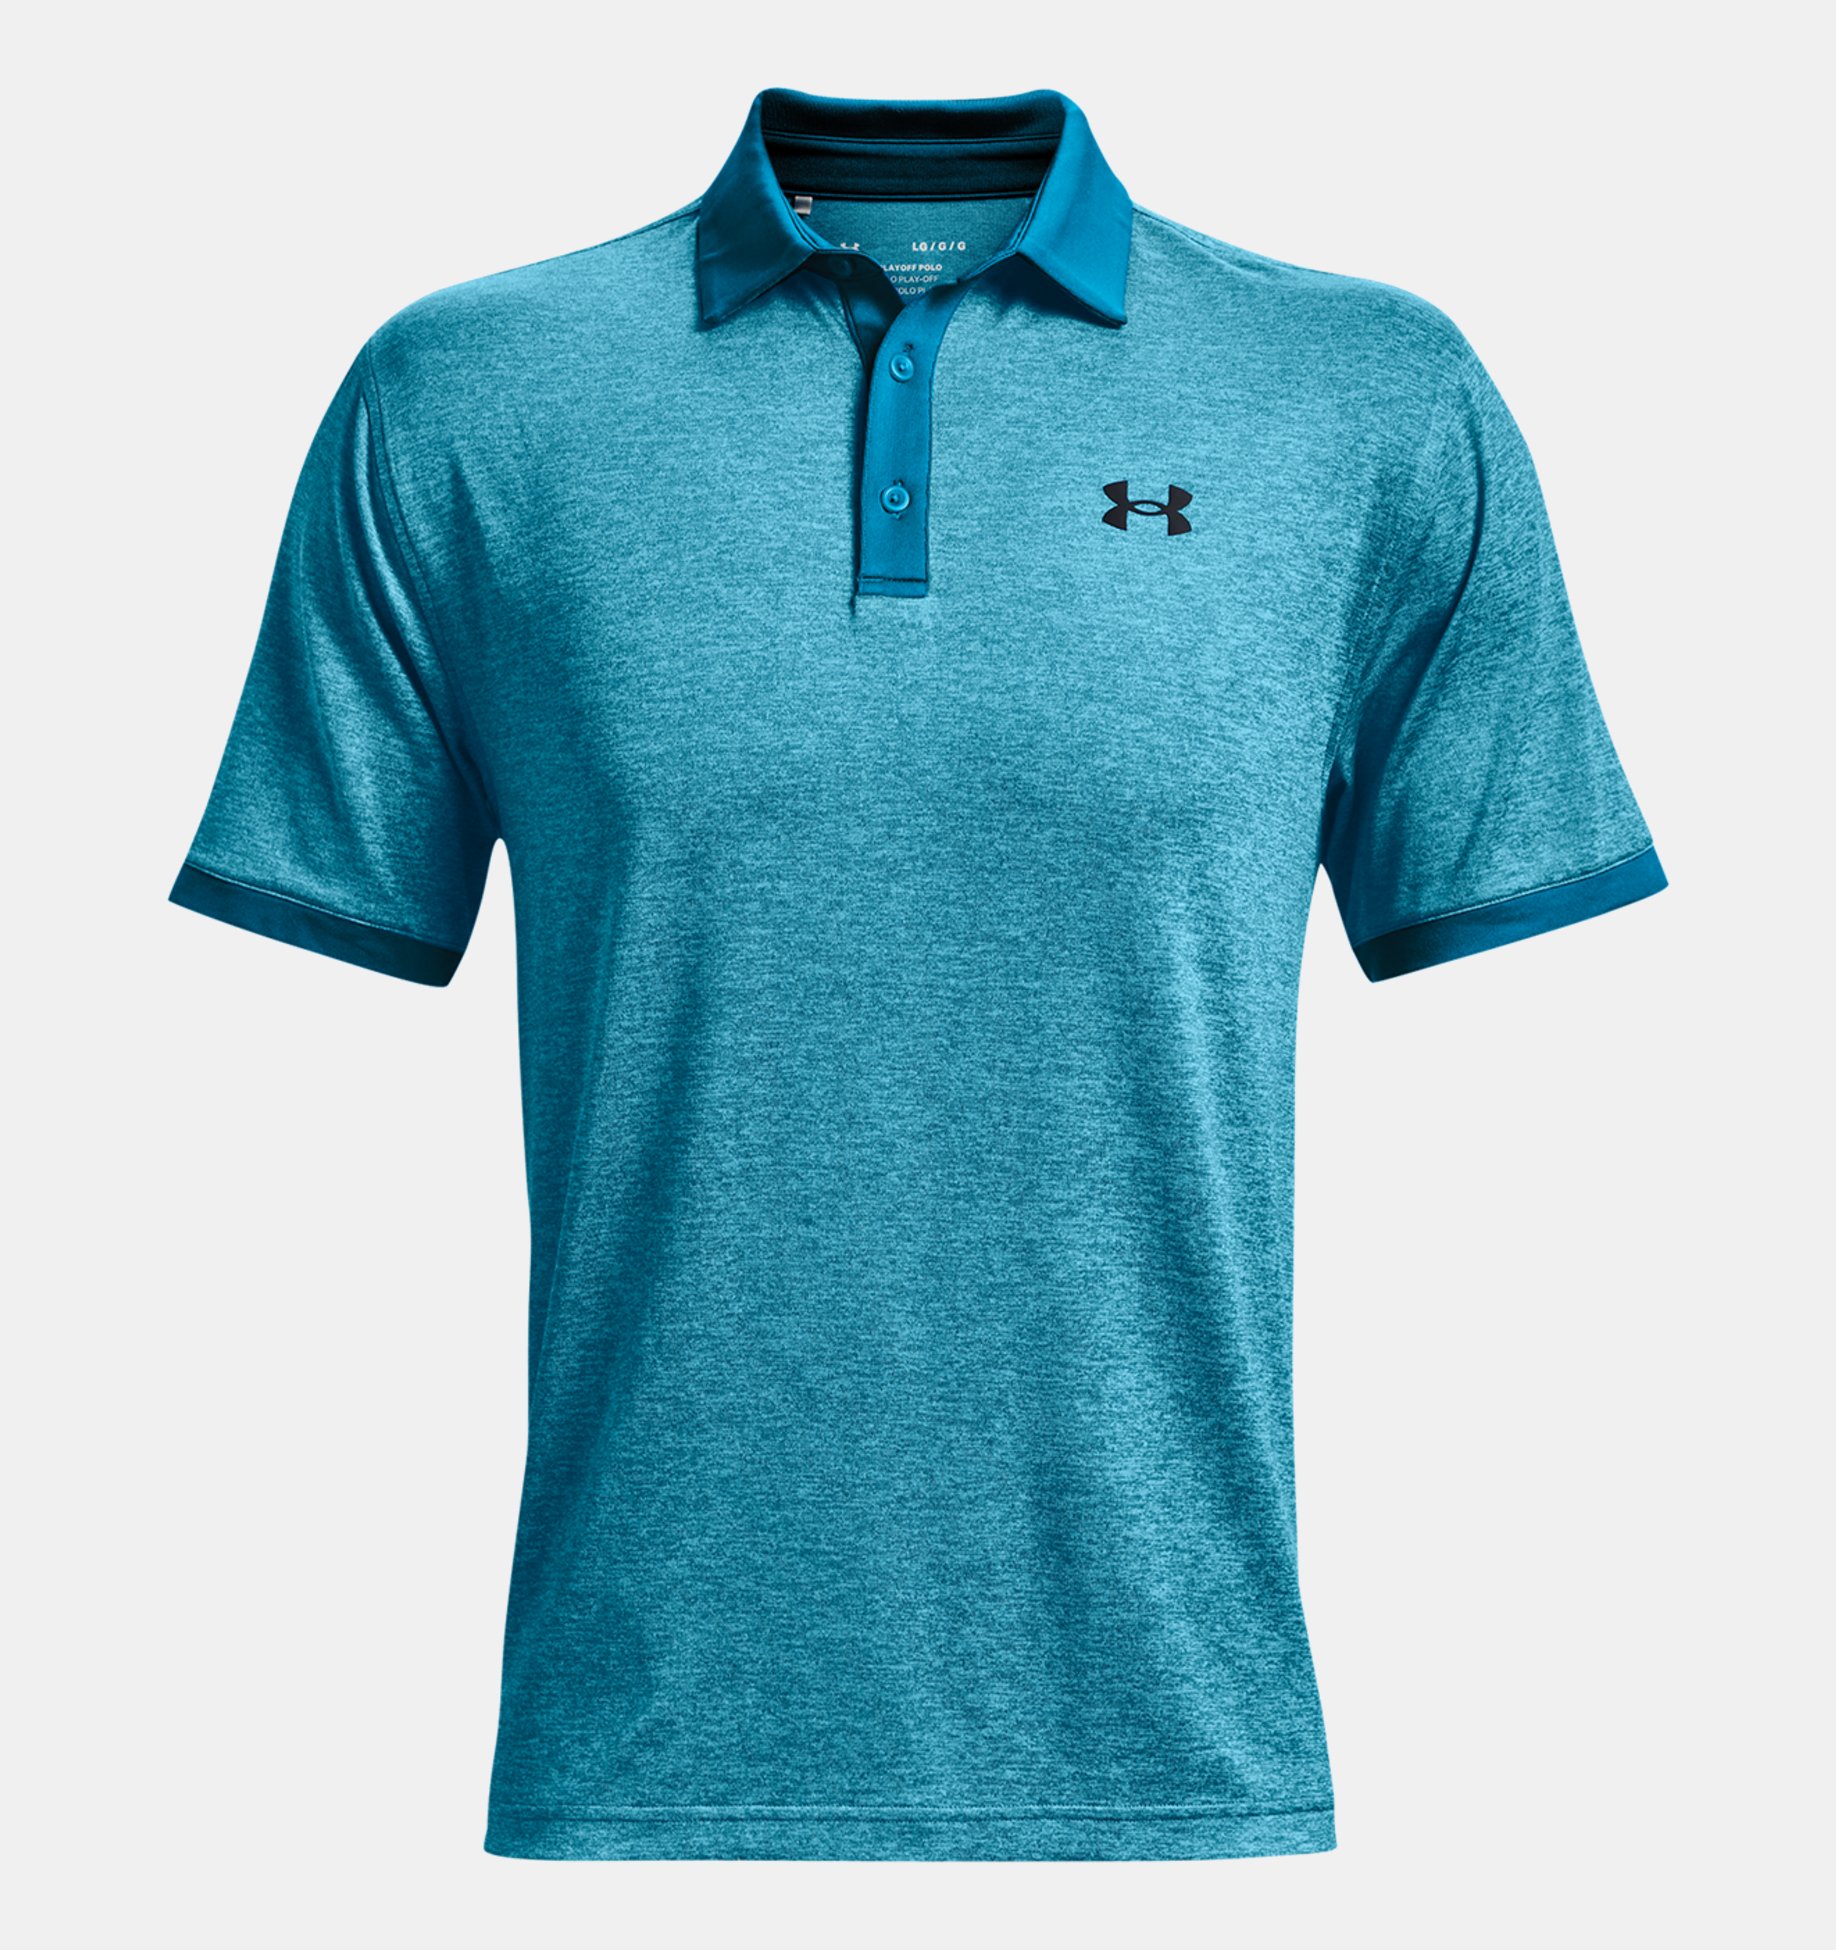 Under Armour Mens Playoff 2.0 T Green Short Sleeve Polo Shirt with Sun Protection SM 